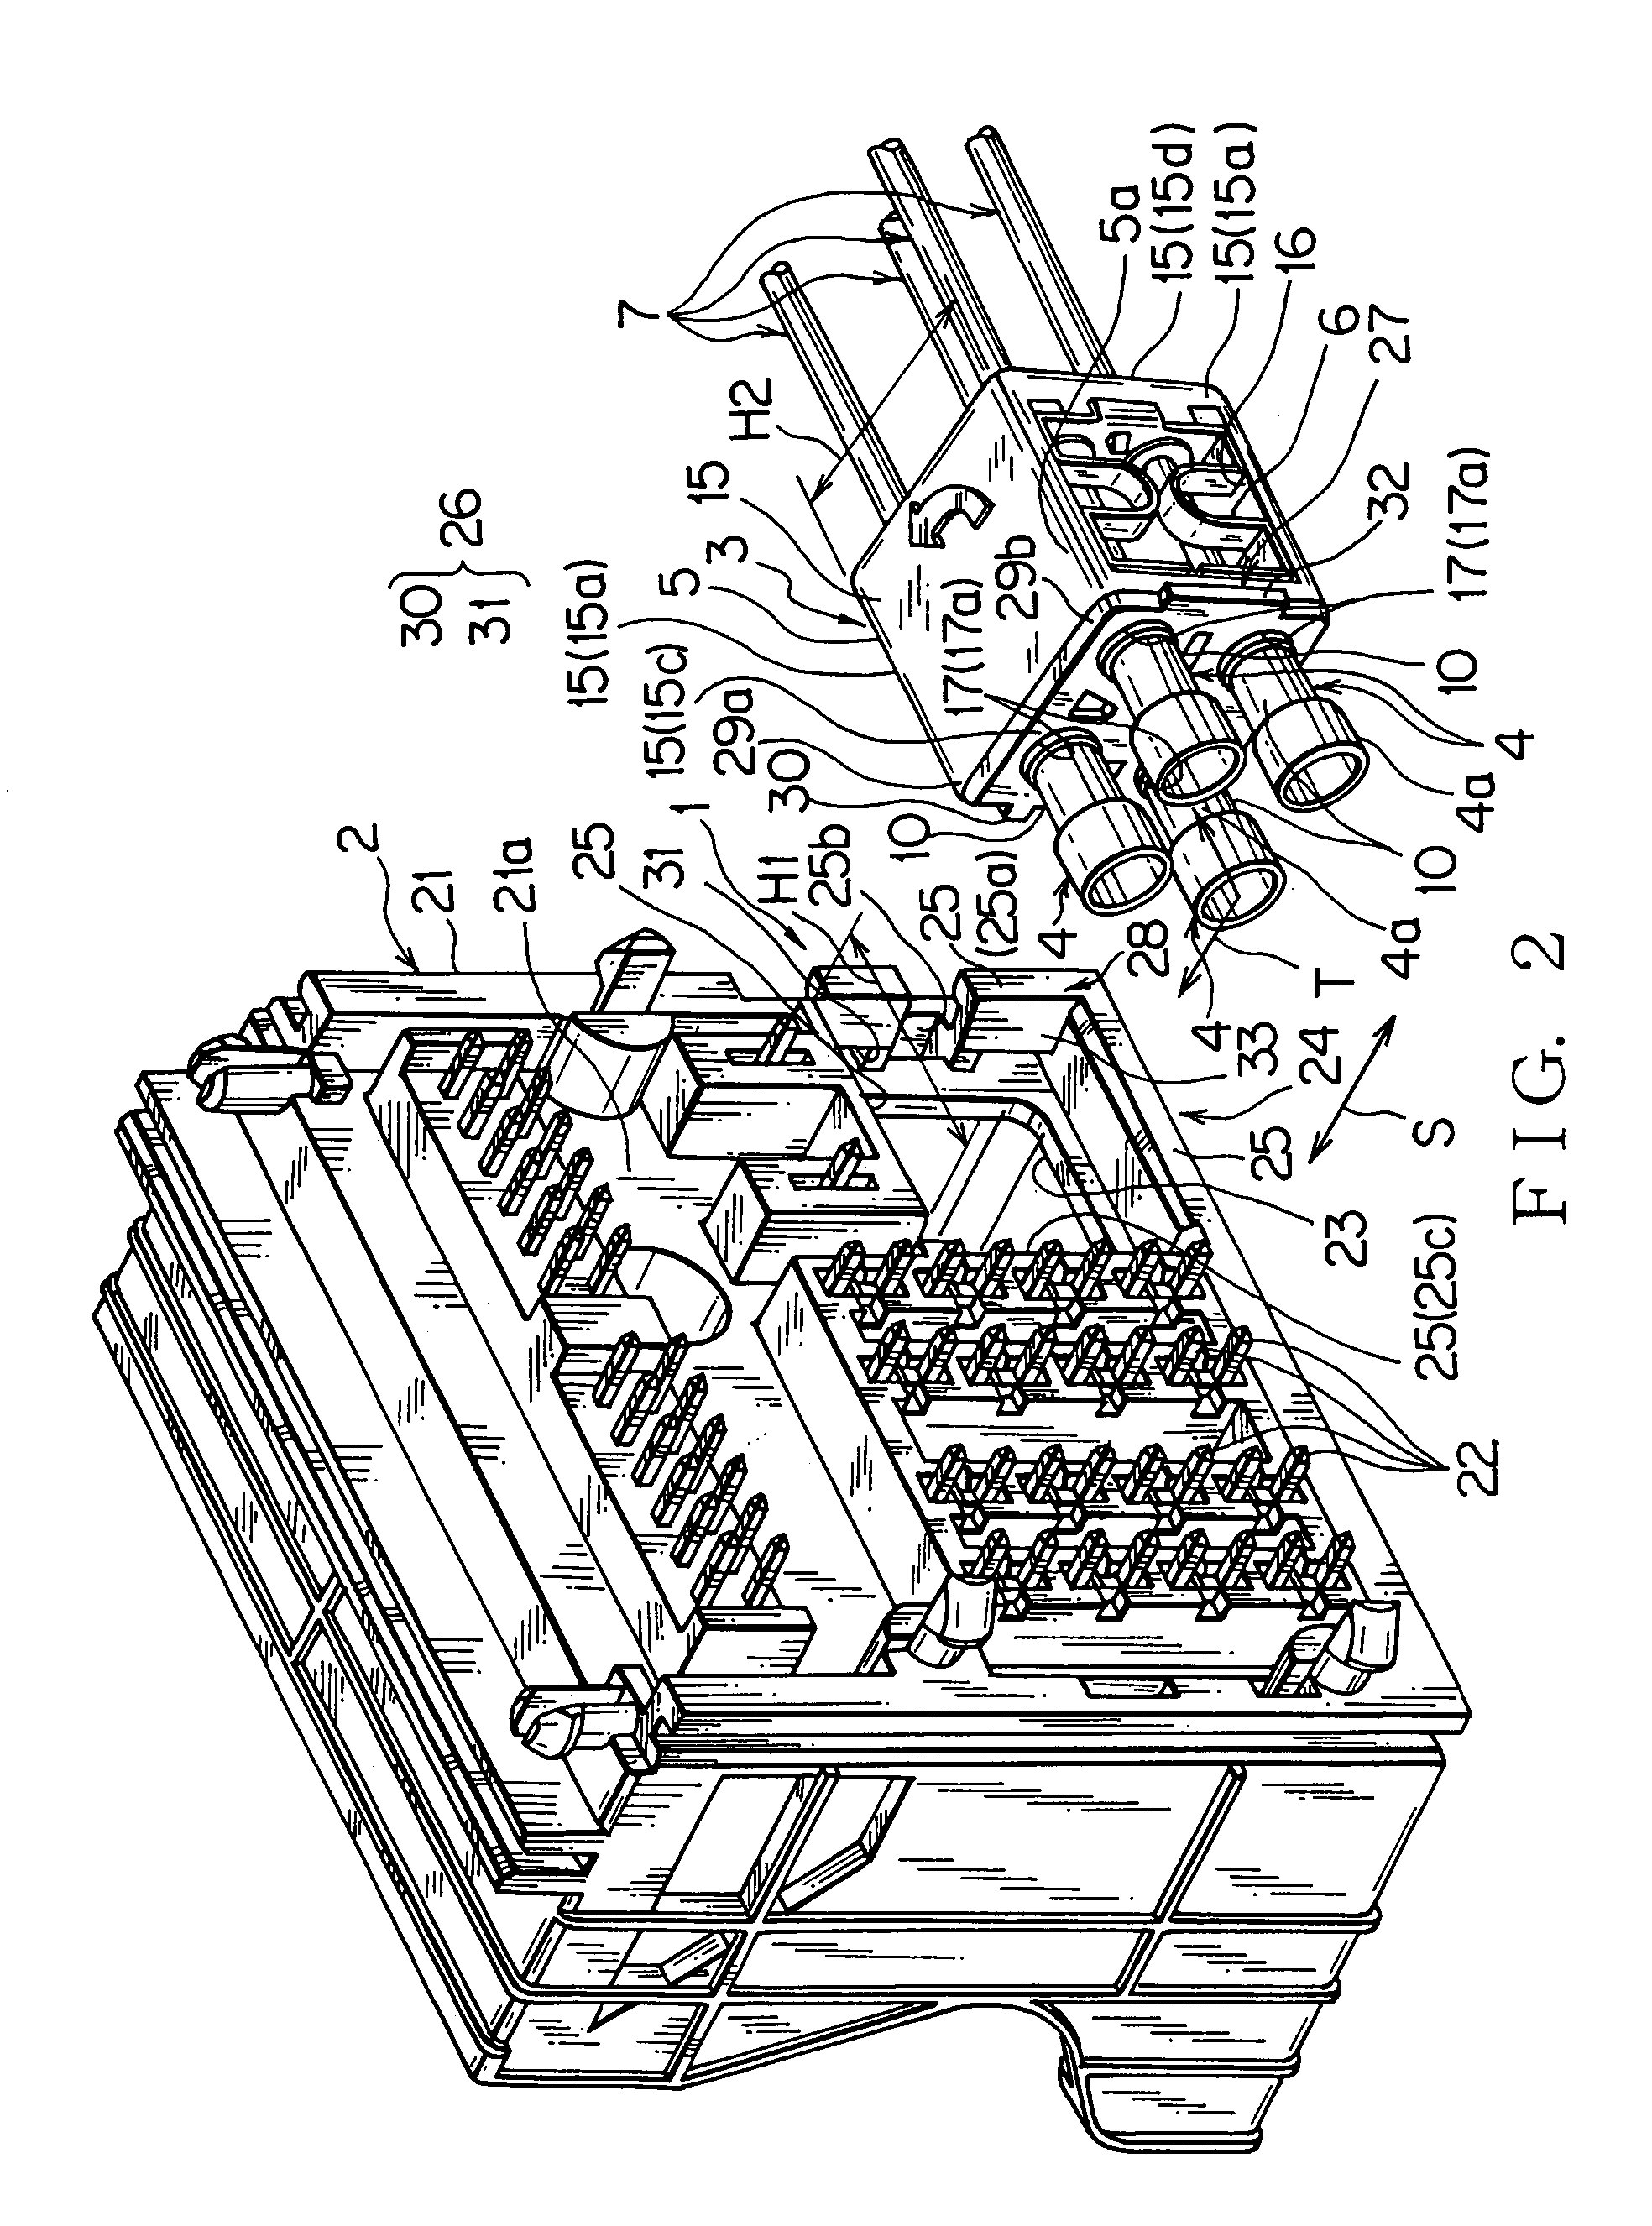 Structure of removable electrical connector